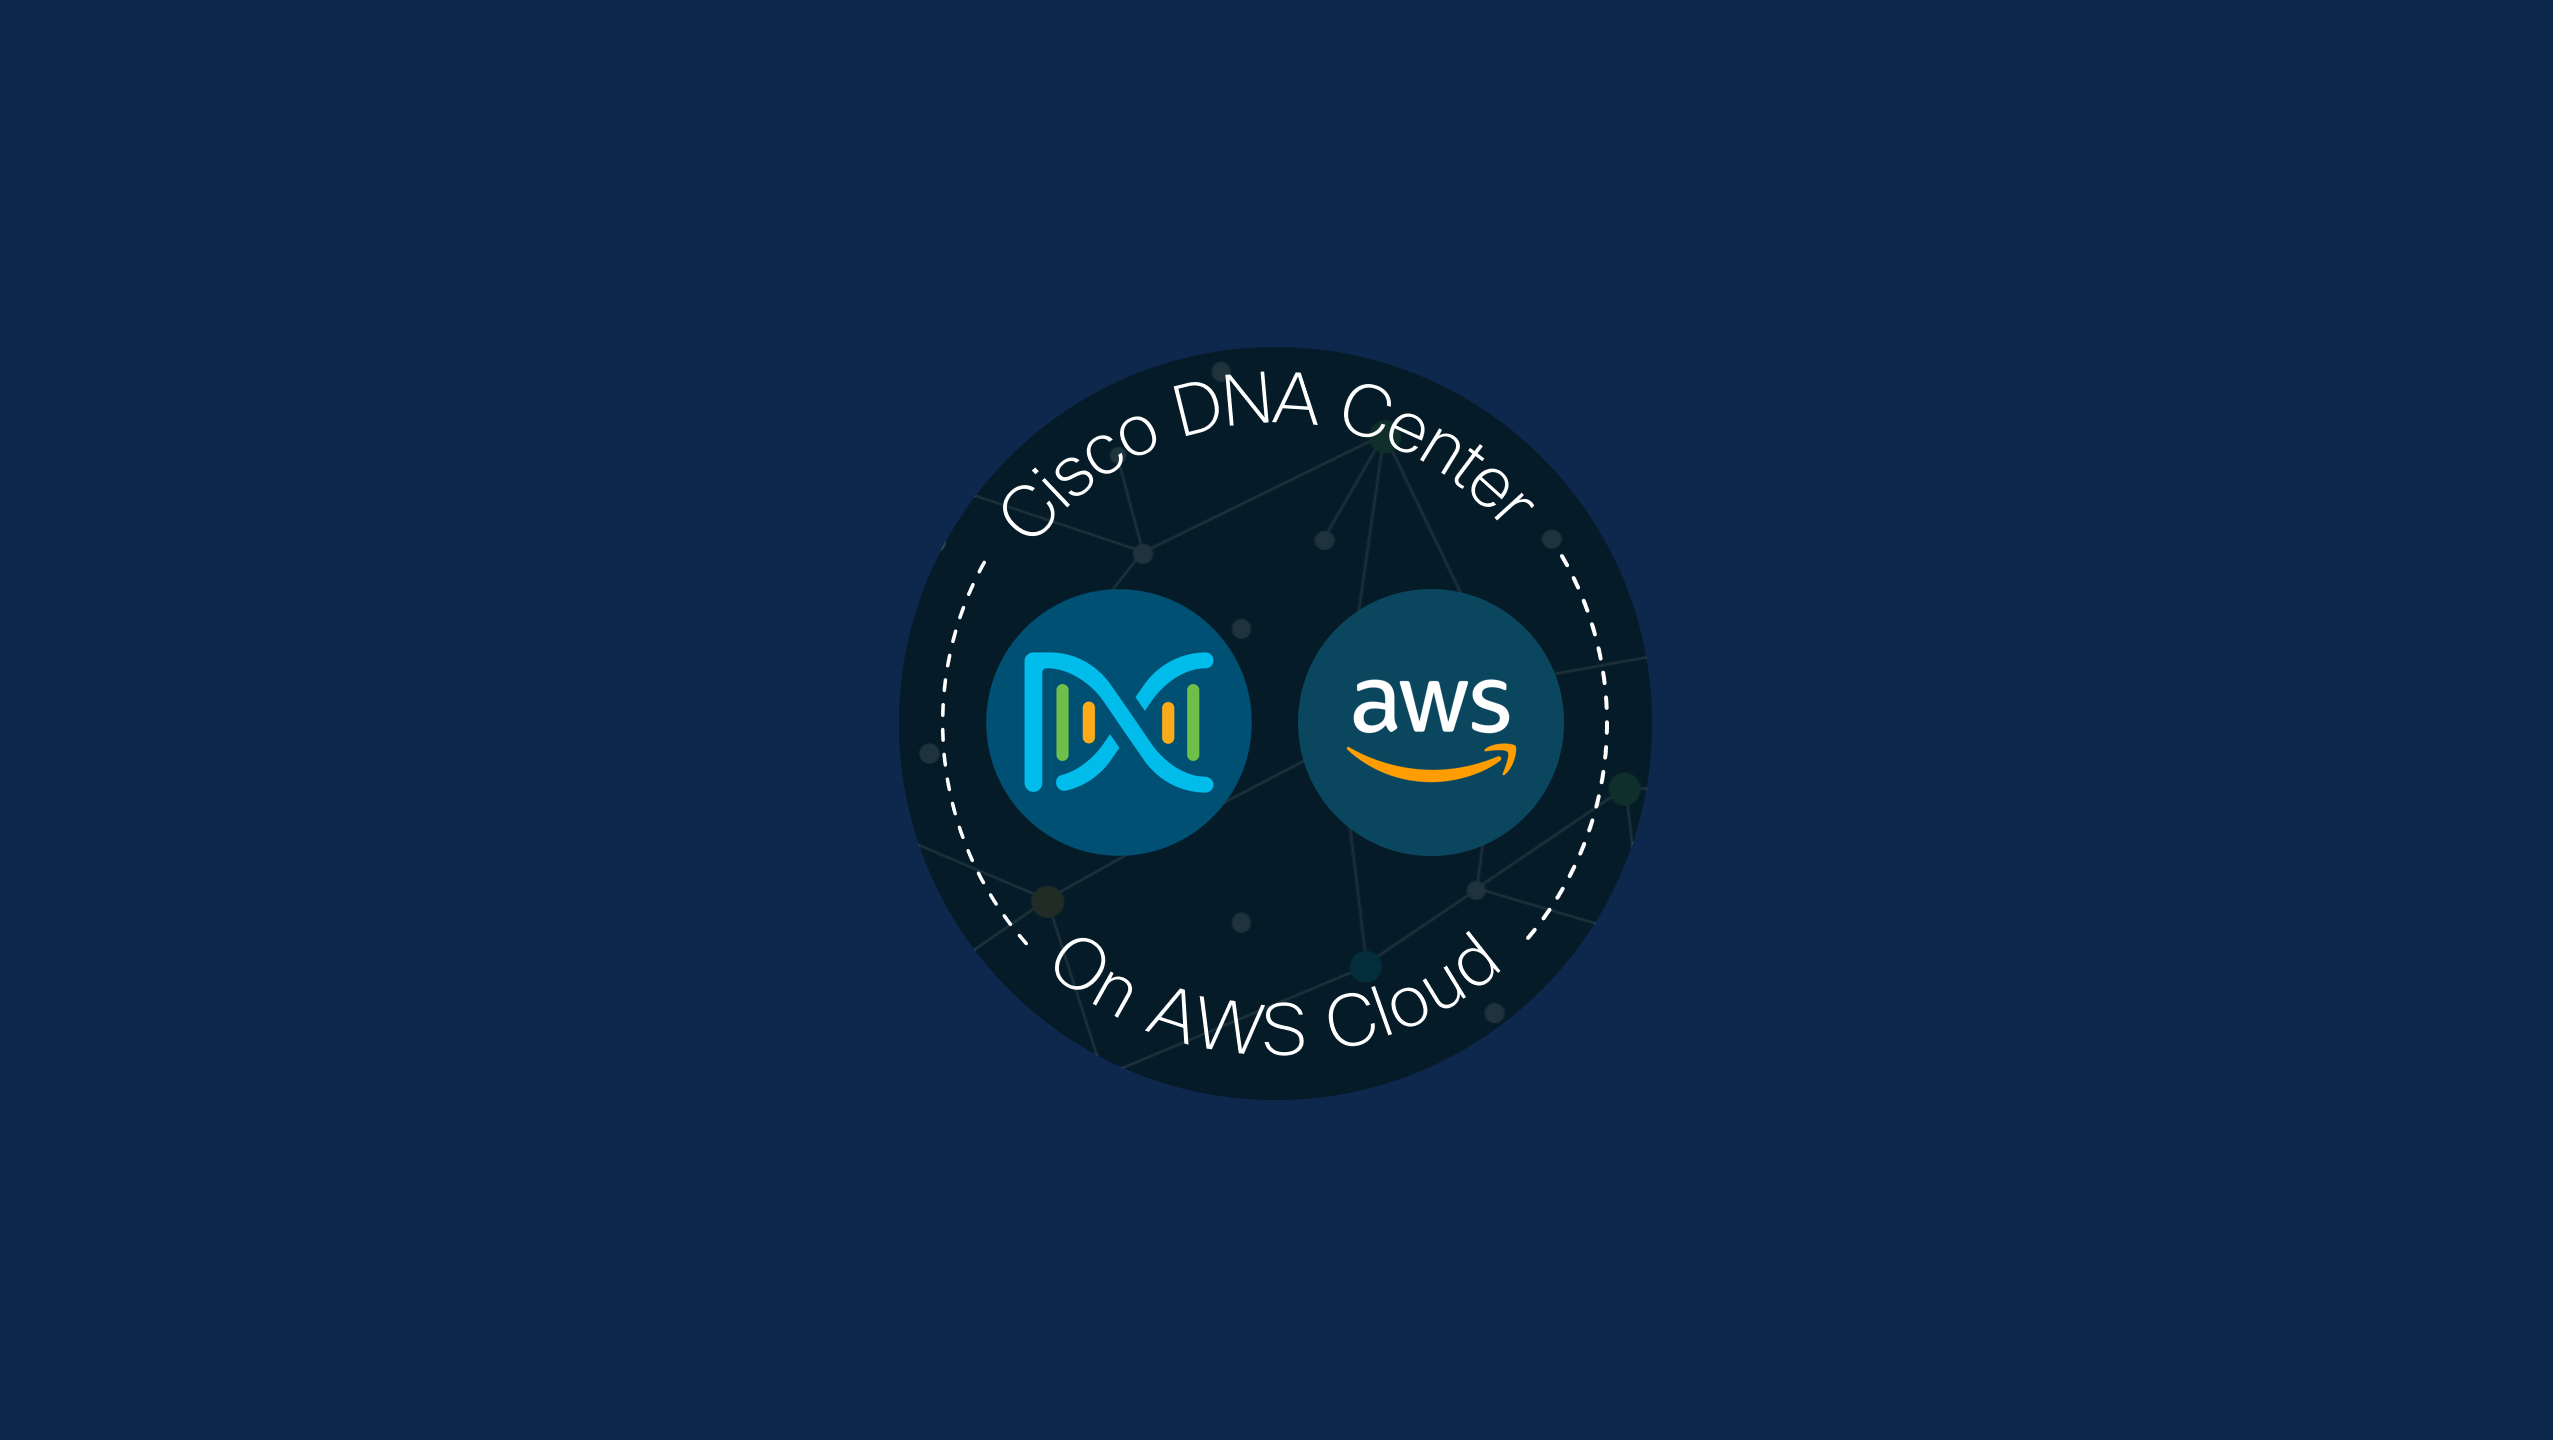 Cisco is partnering with AWS to offer the ability to run Cisco DNA Center